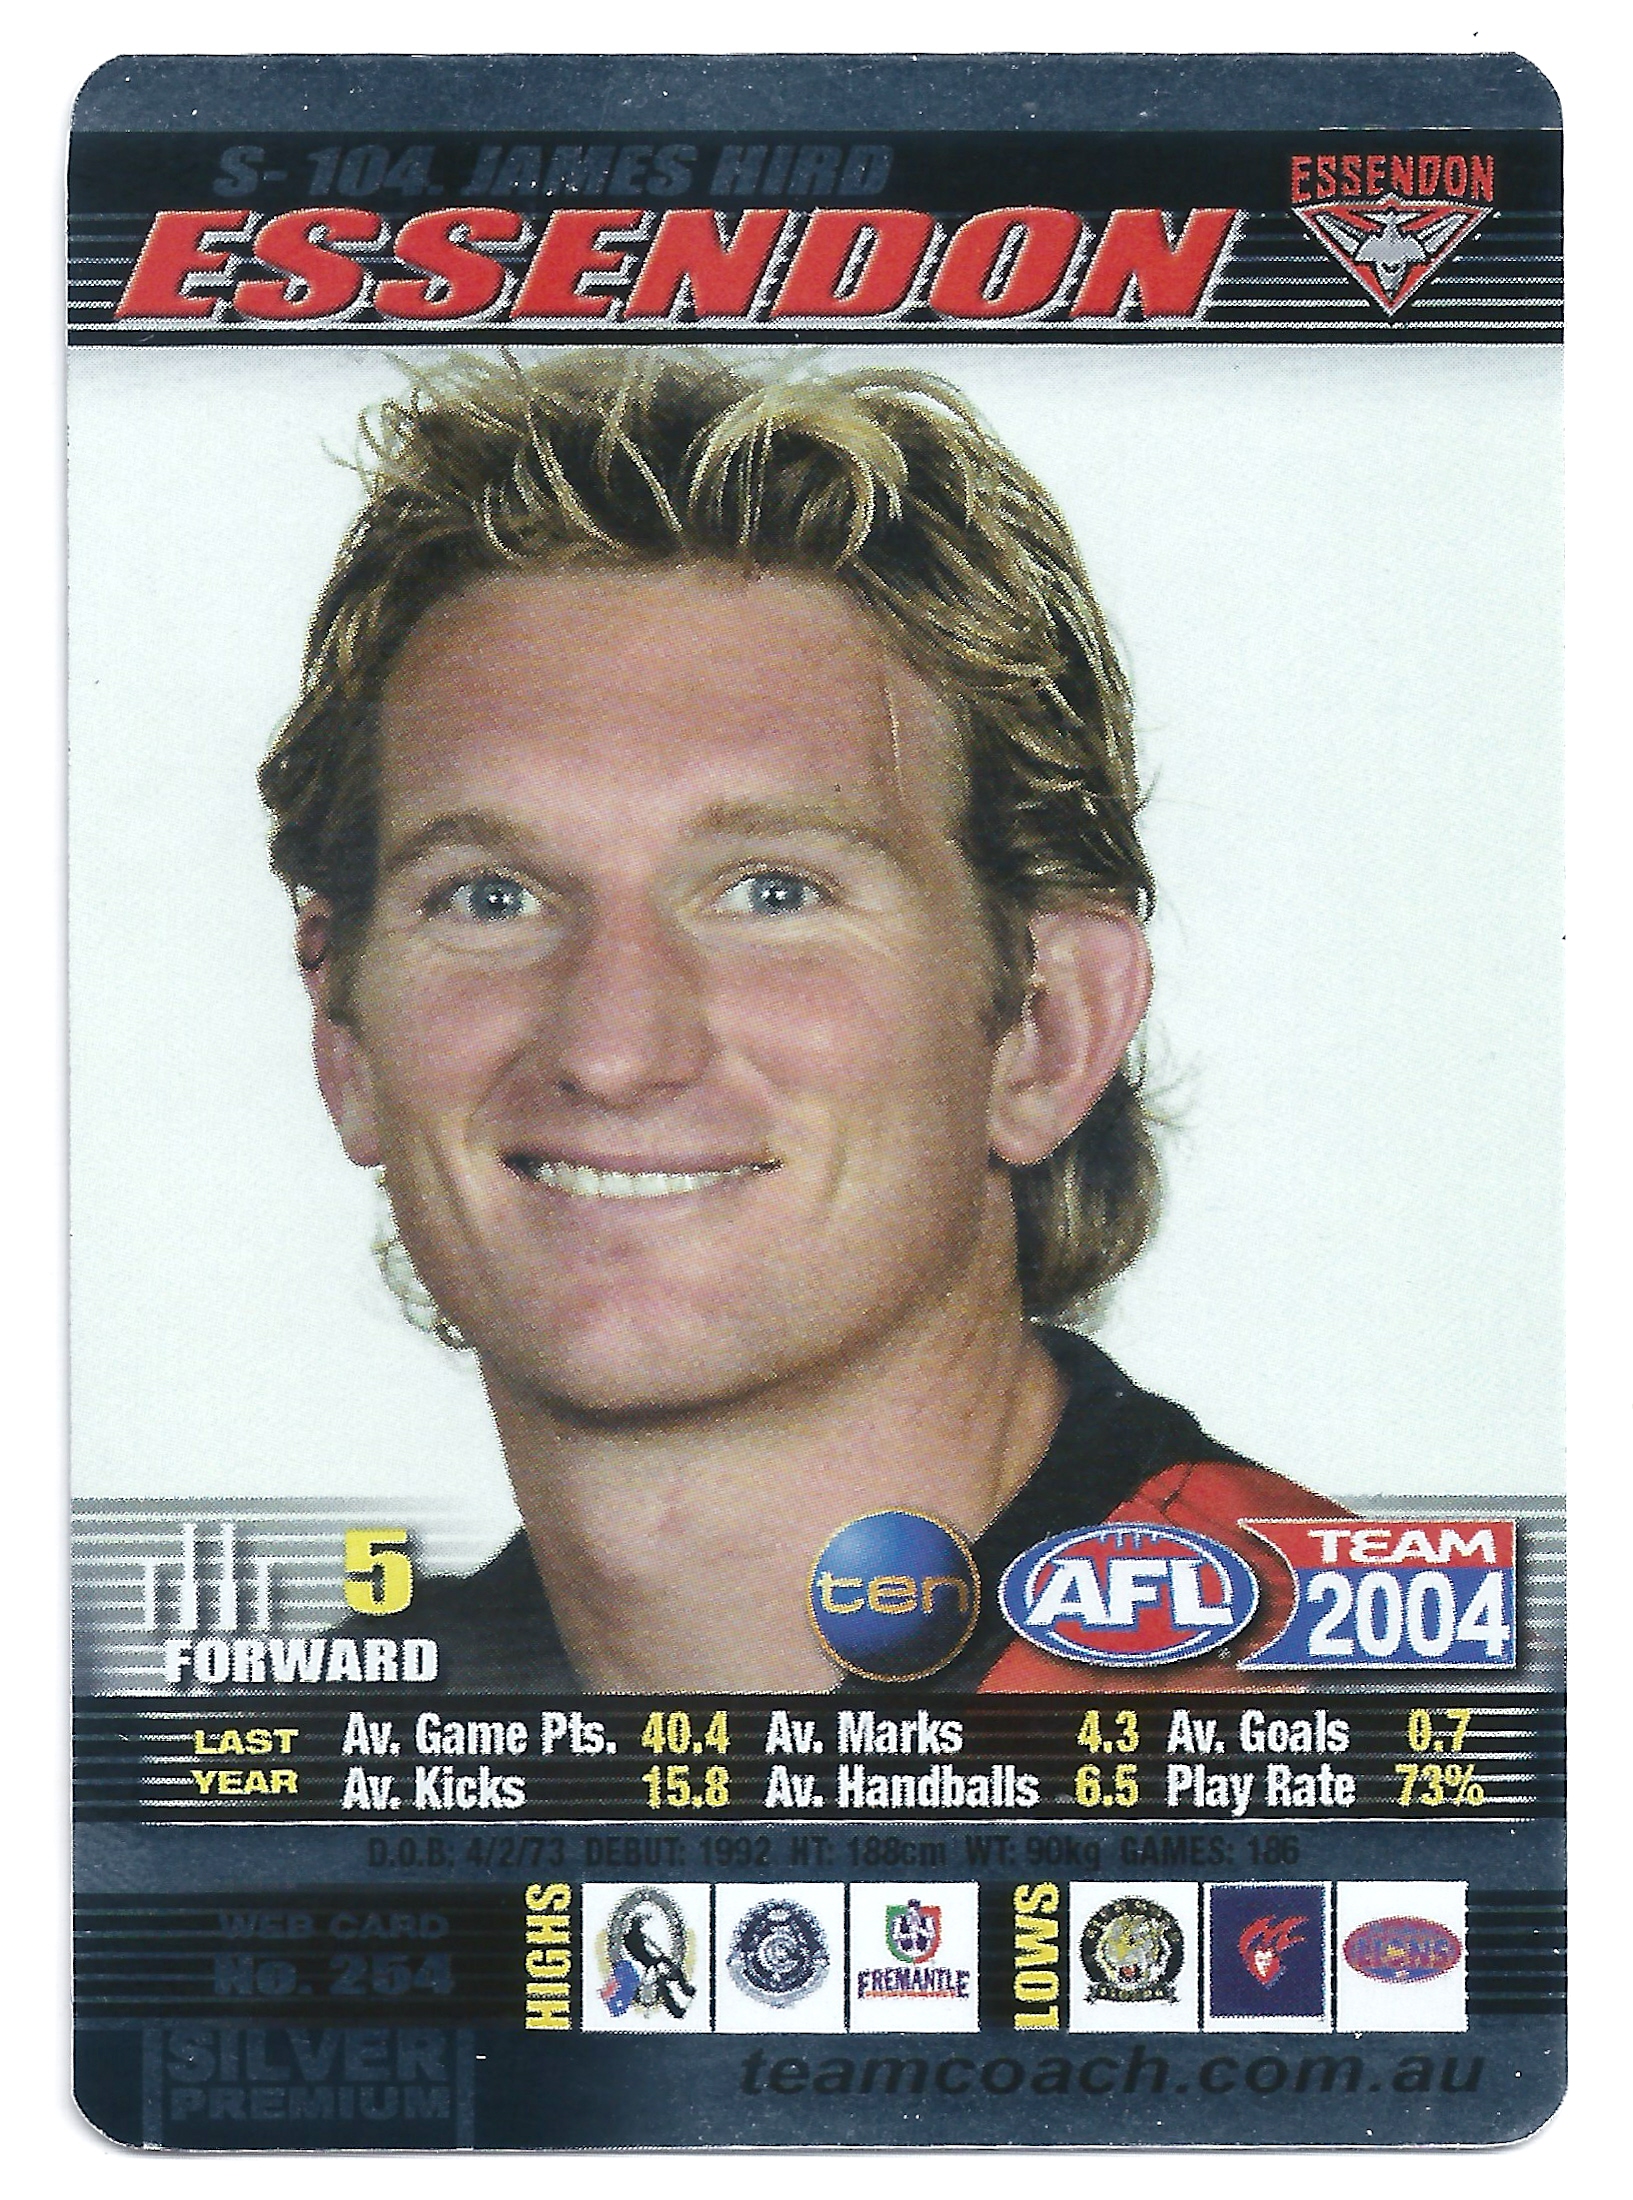 2004 Teamcoach Silver (S-104) James Hird Wessendon